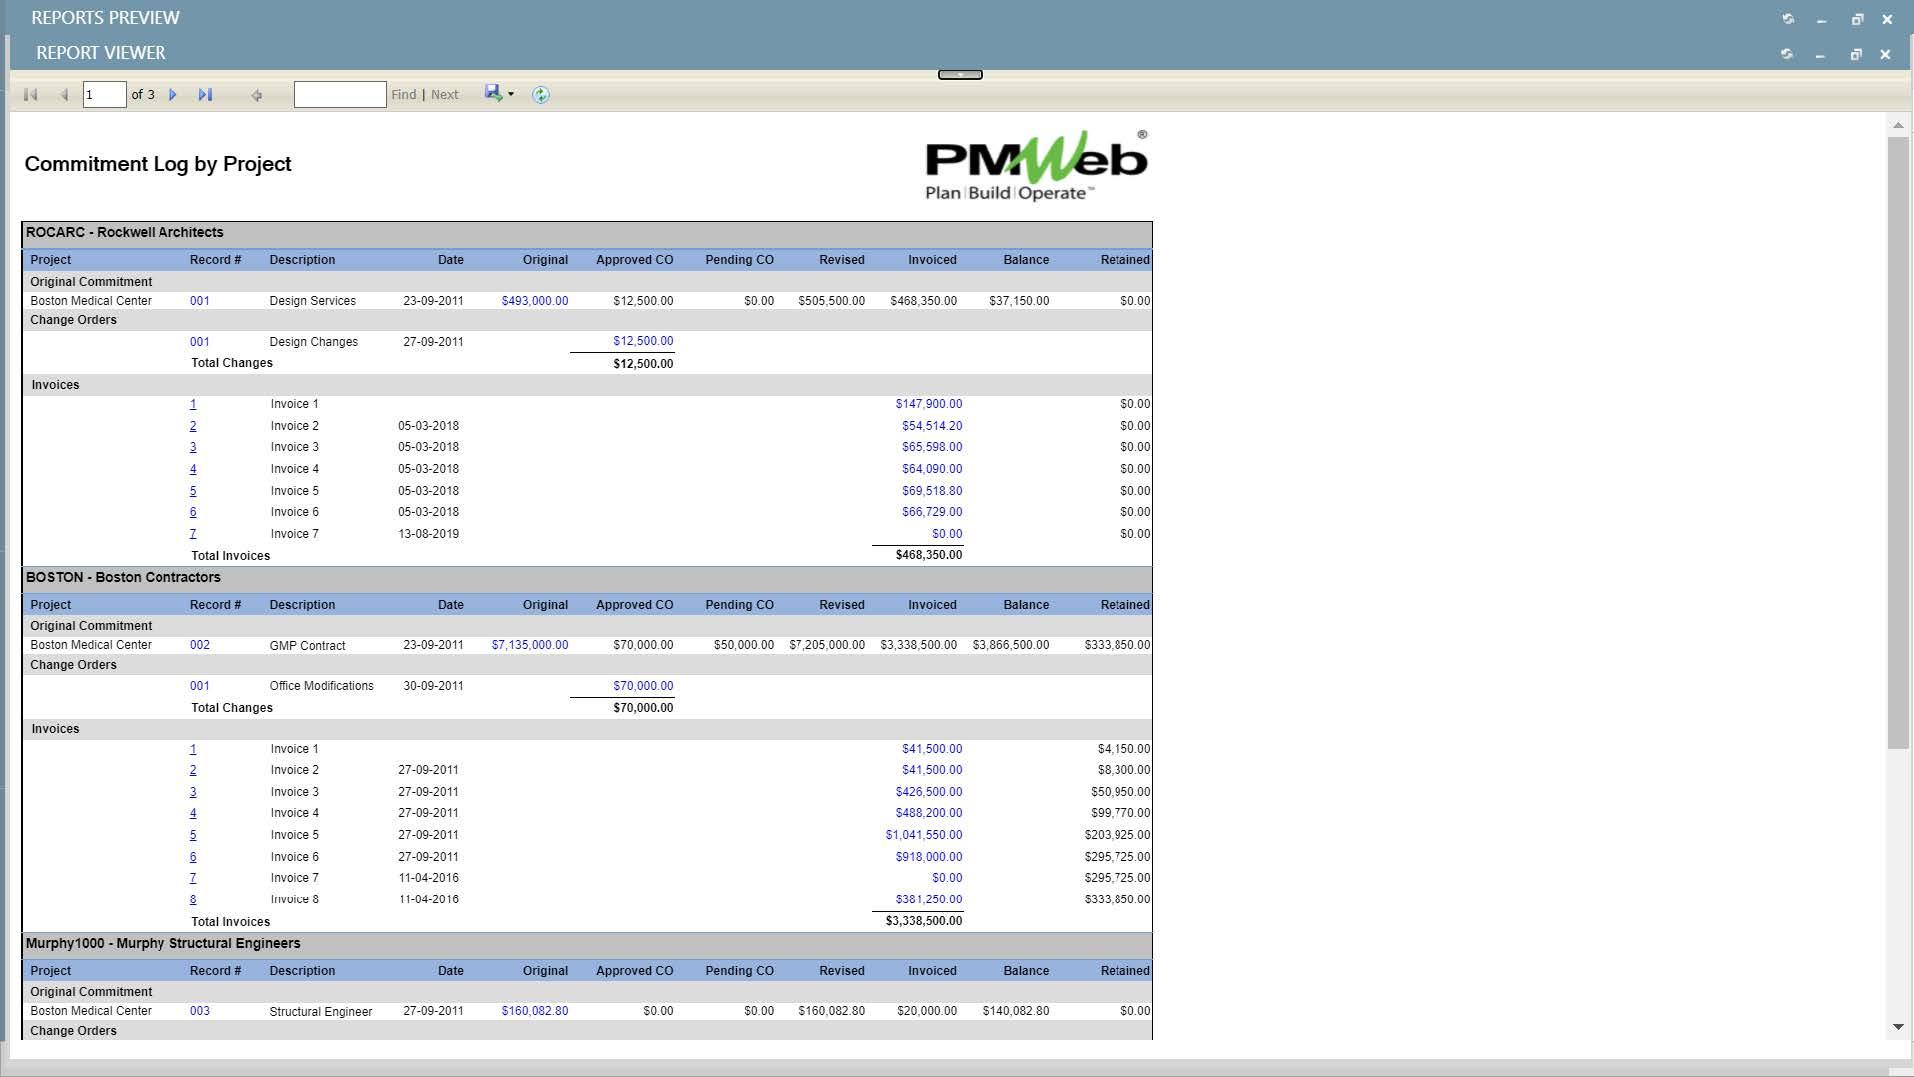 PMWeb 7 Reports Preview Report Viewer 
Commitment Log by Project